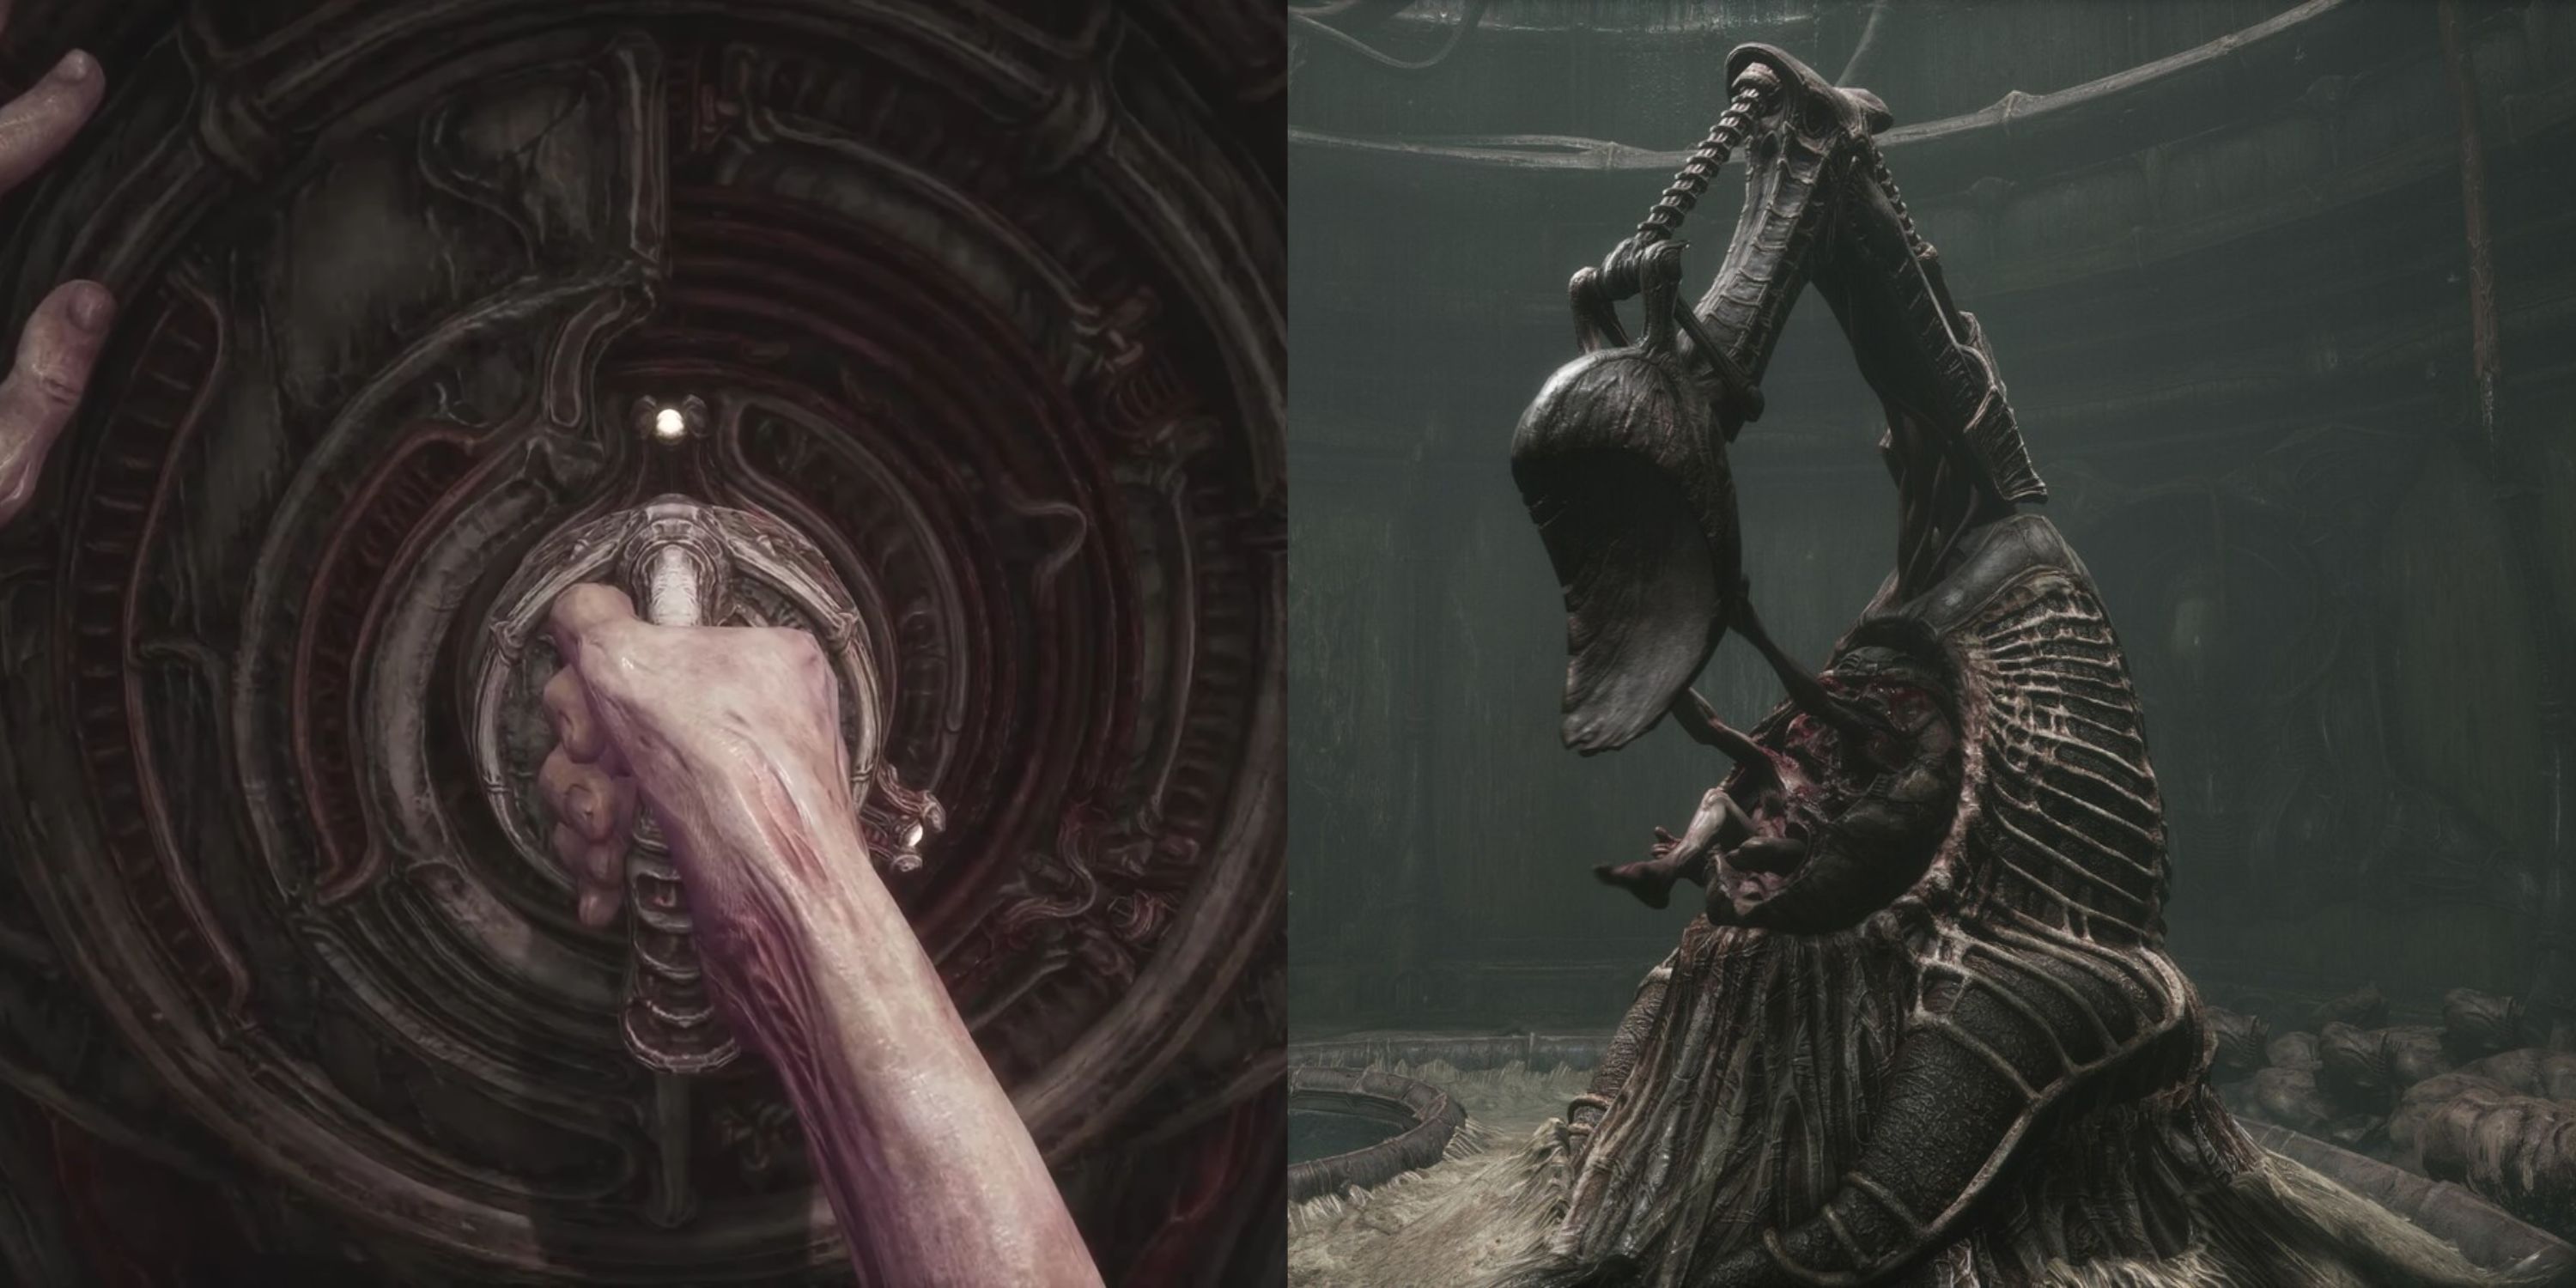 Featured image the Skeleton Key puzzle in Scorn and the creature in a device